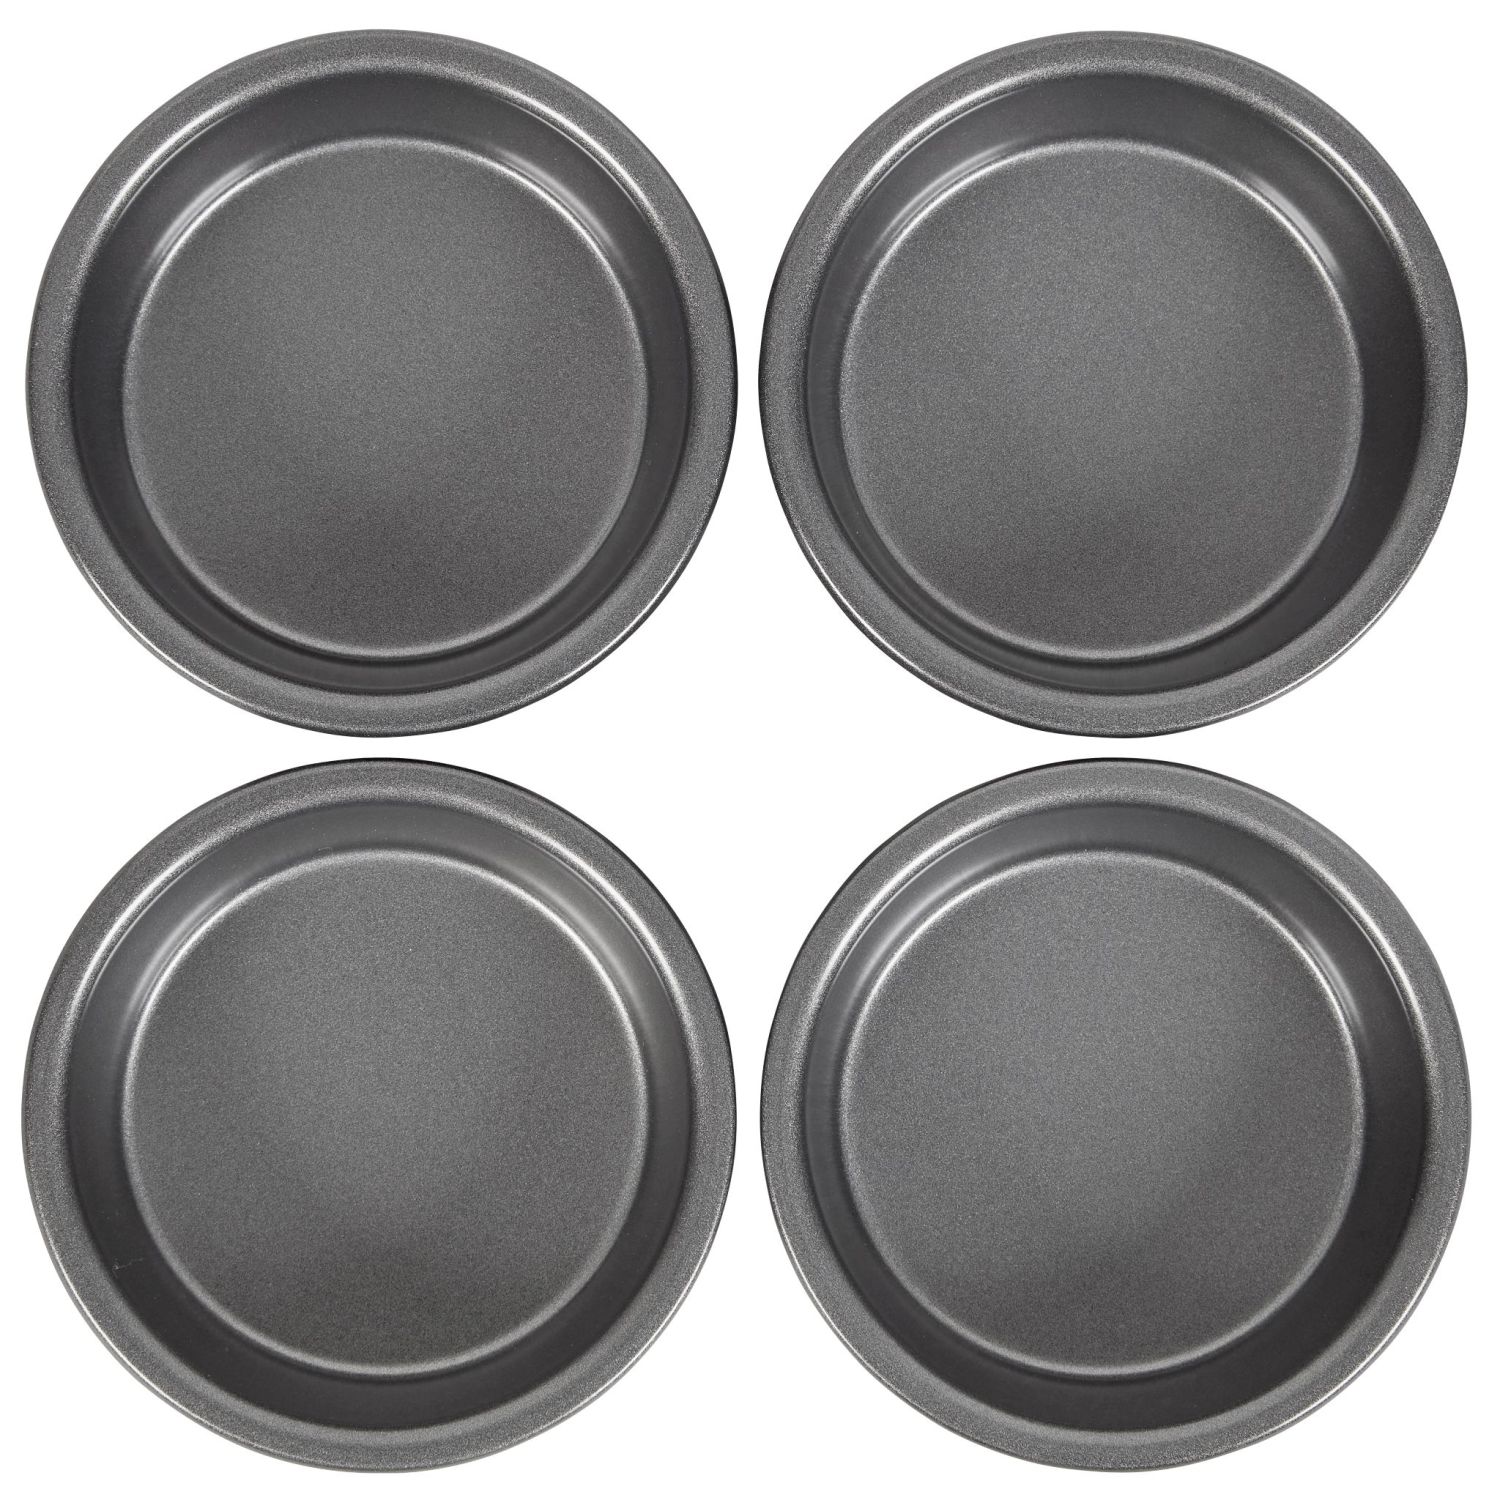 Wilton set 4 ROUND CAKE TINS 3 inch deep 2105-2932 - from only £21.21